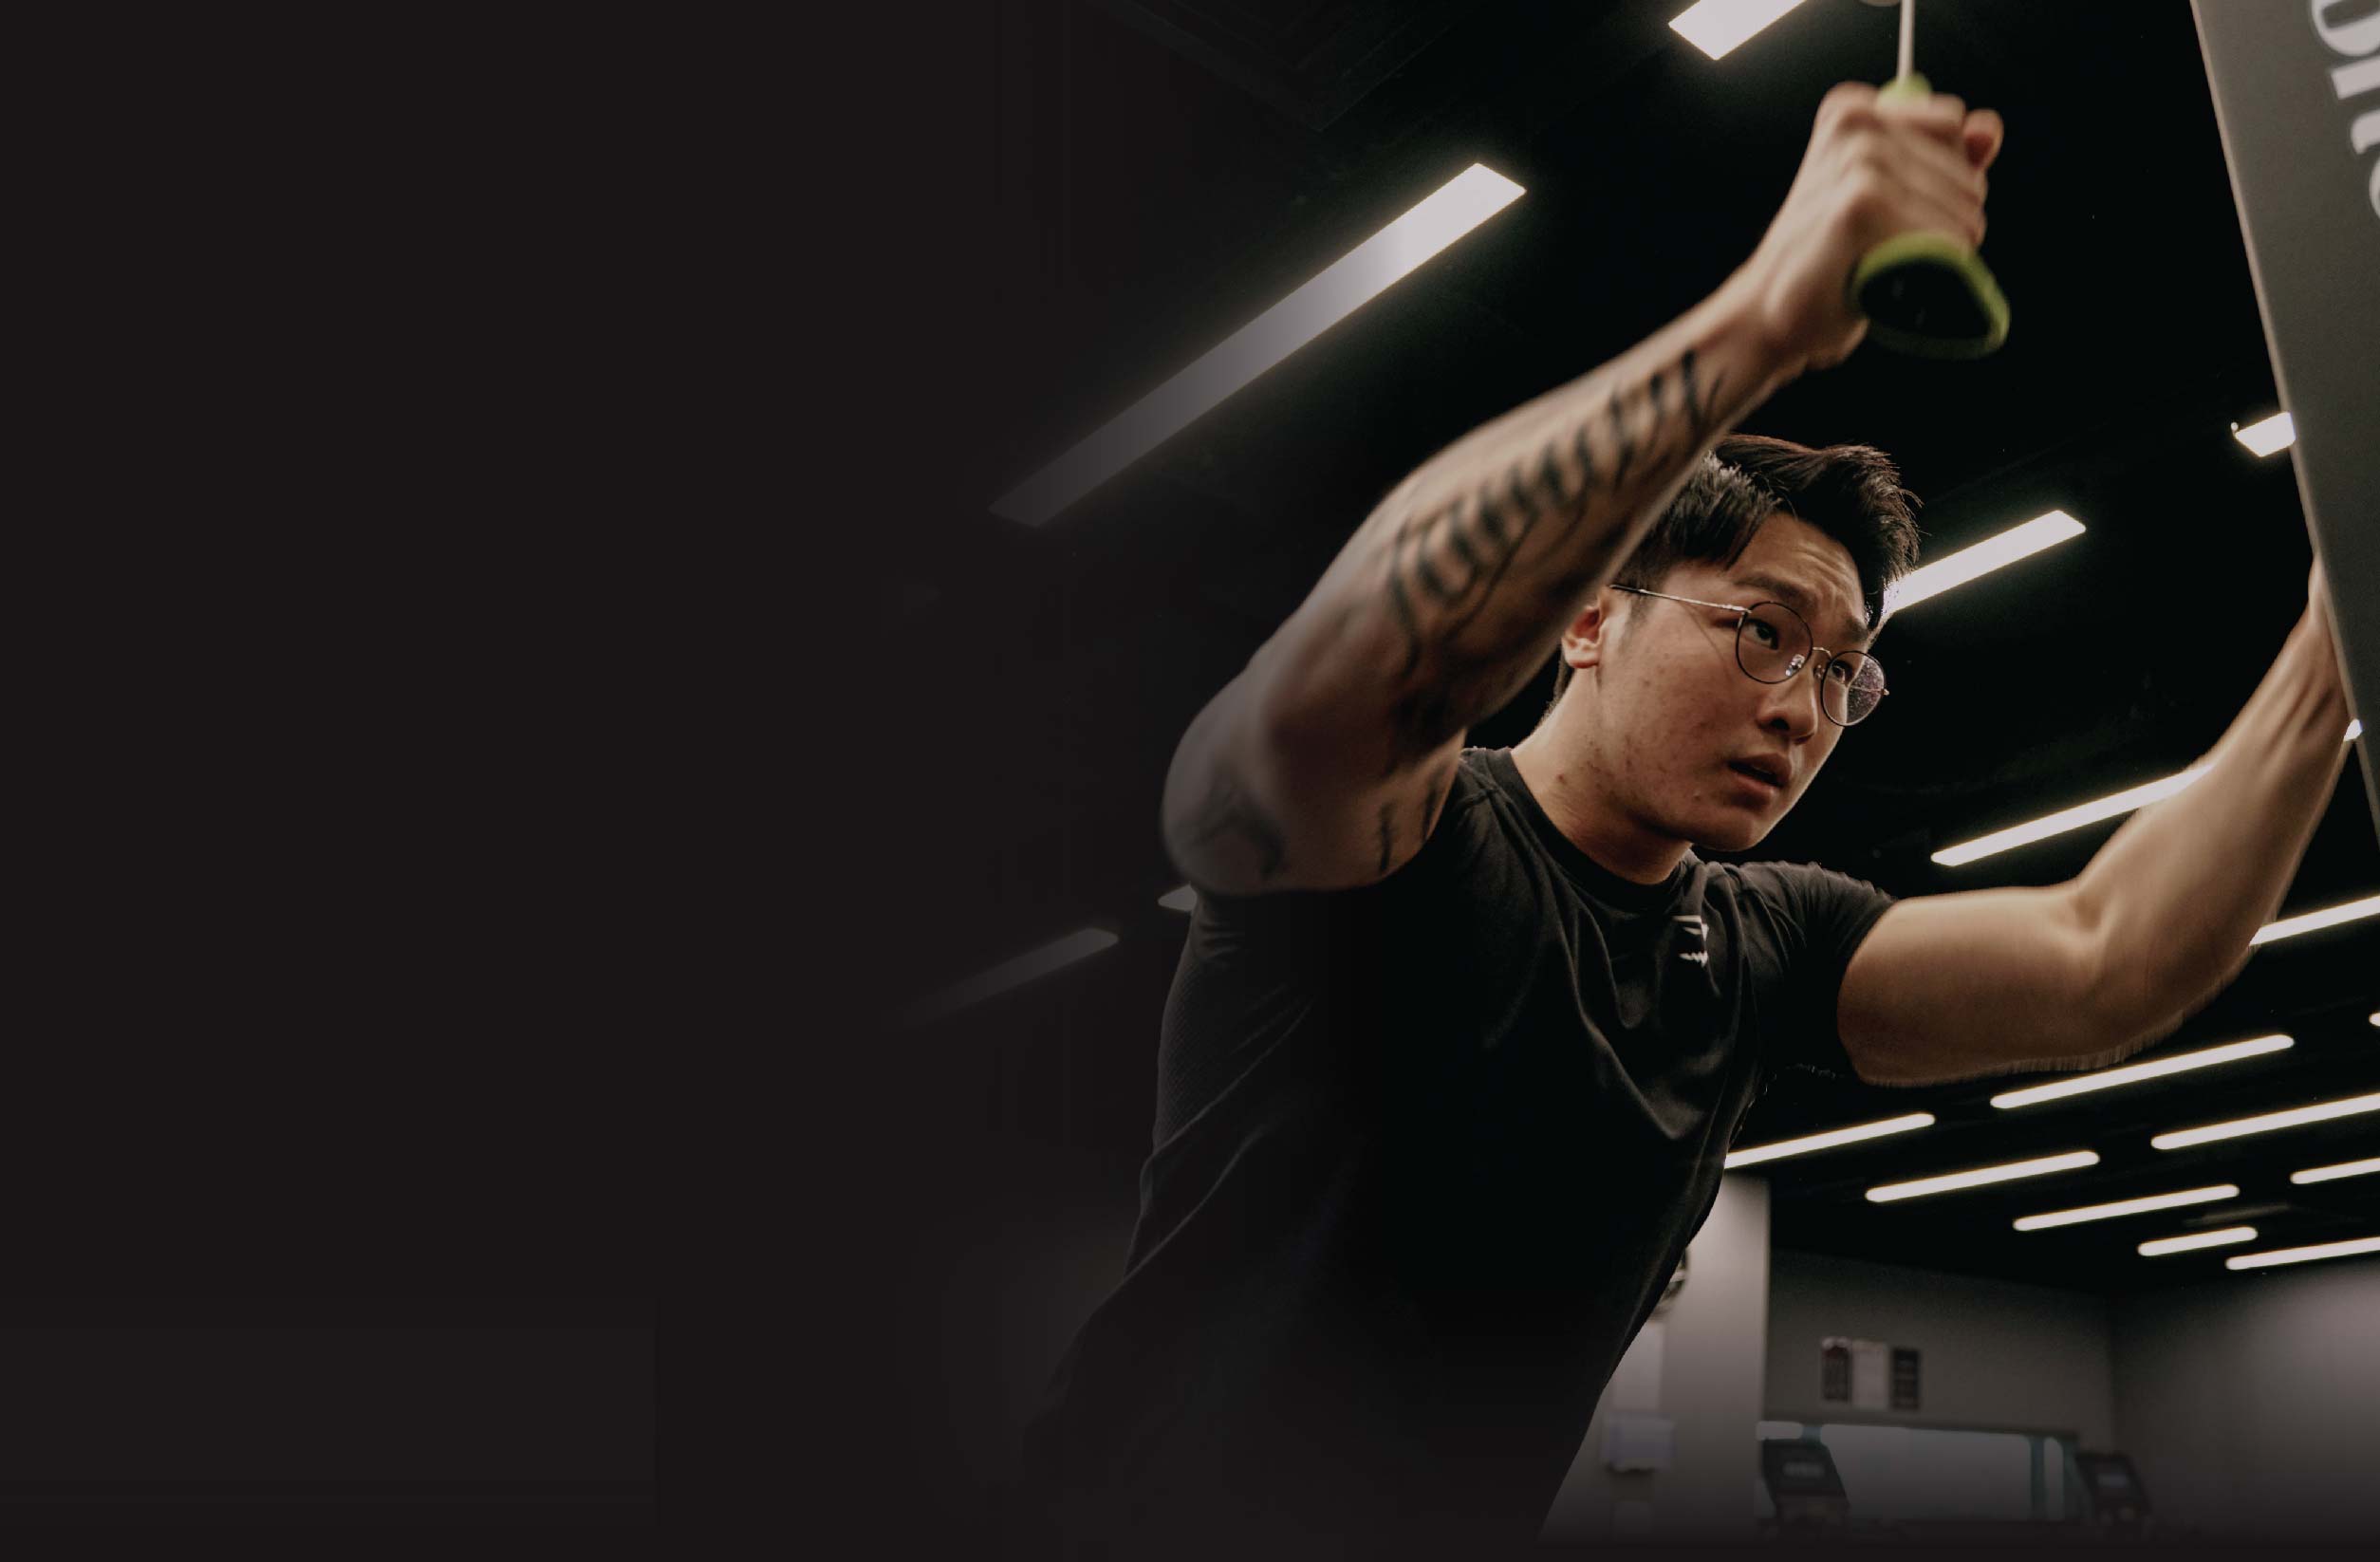 TFX Singapore – Best Gym and Fitness Workouts